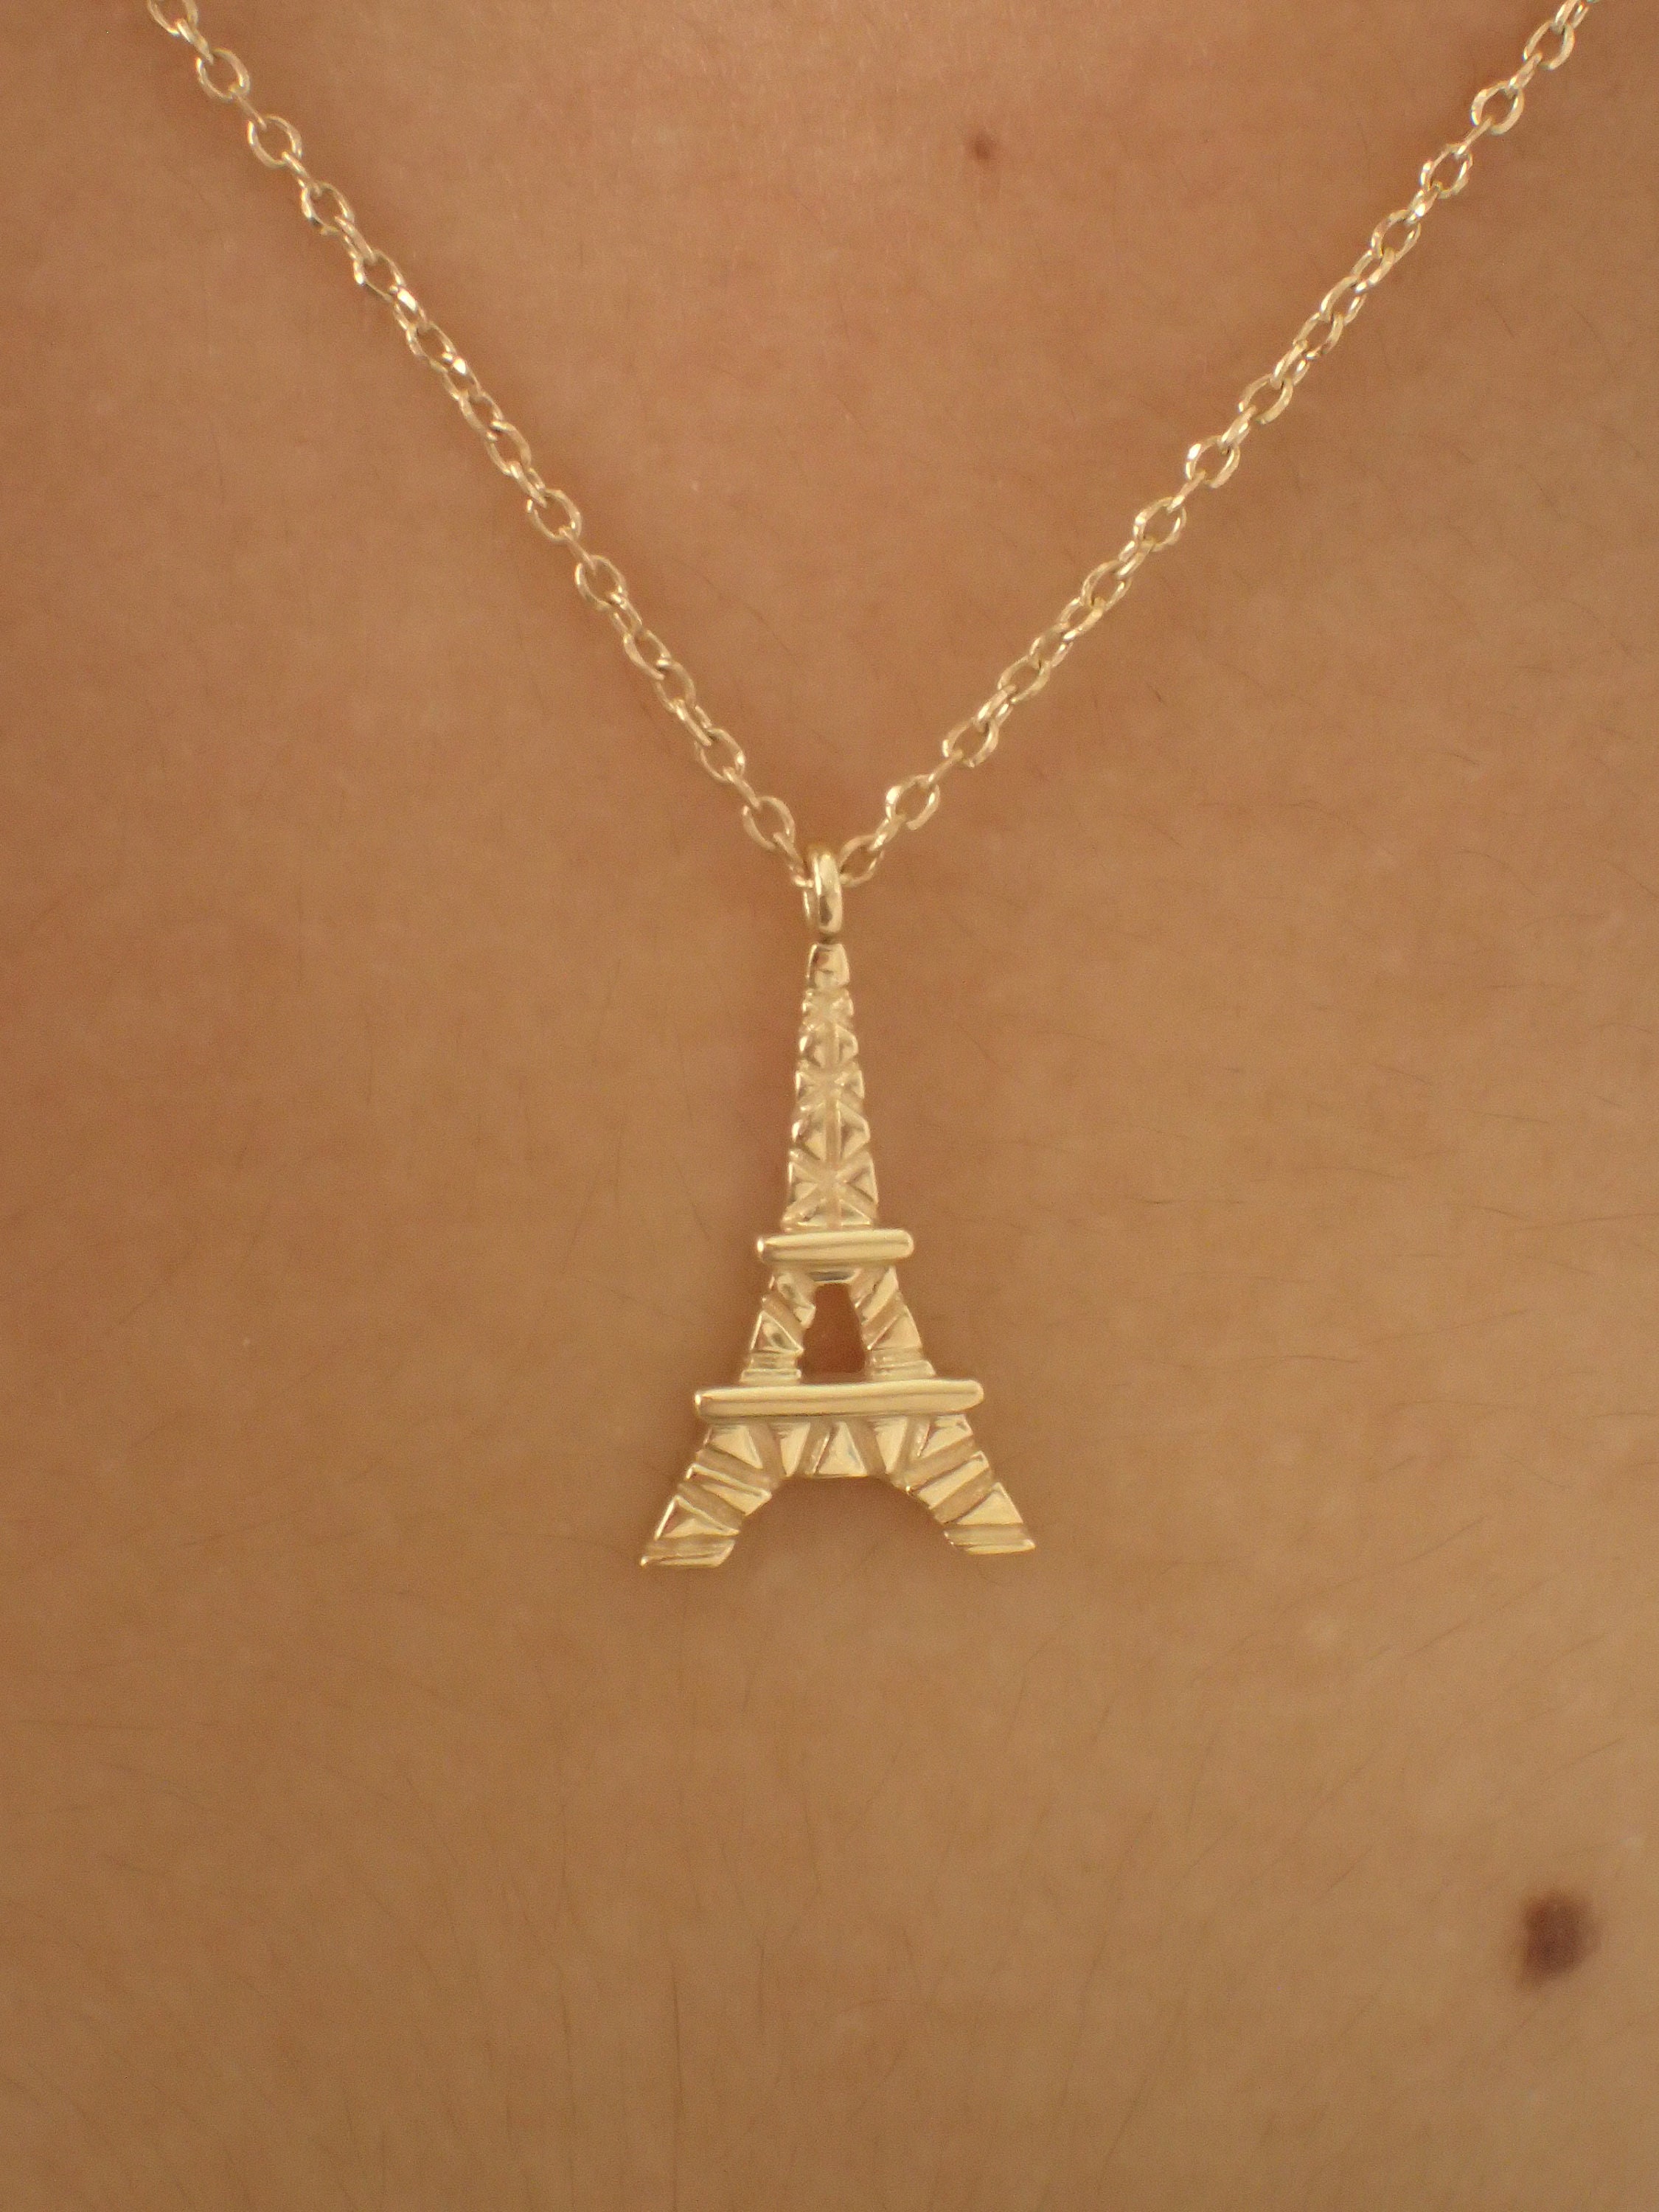 Chic Elegance: Eiffel Tower Necklace in 925 Silver